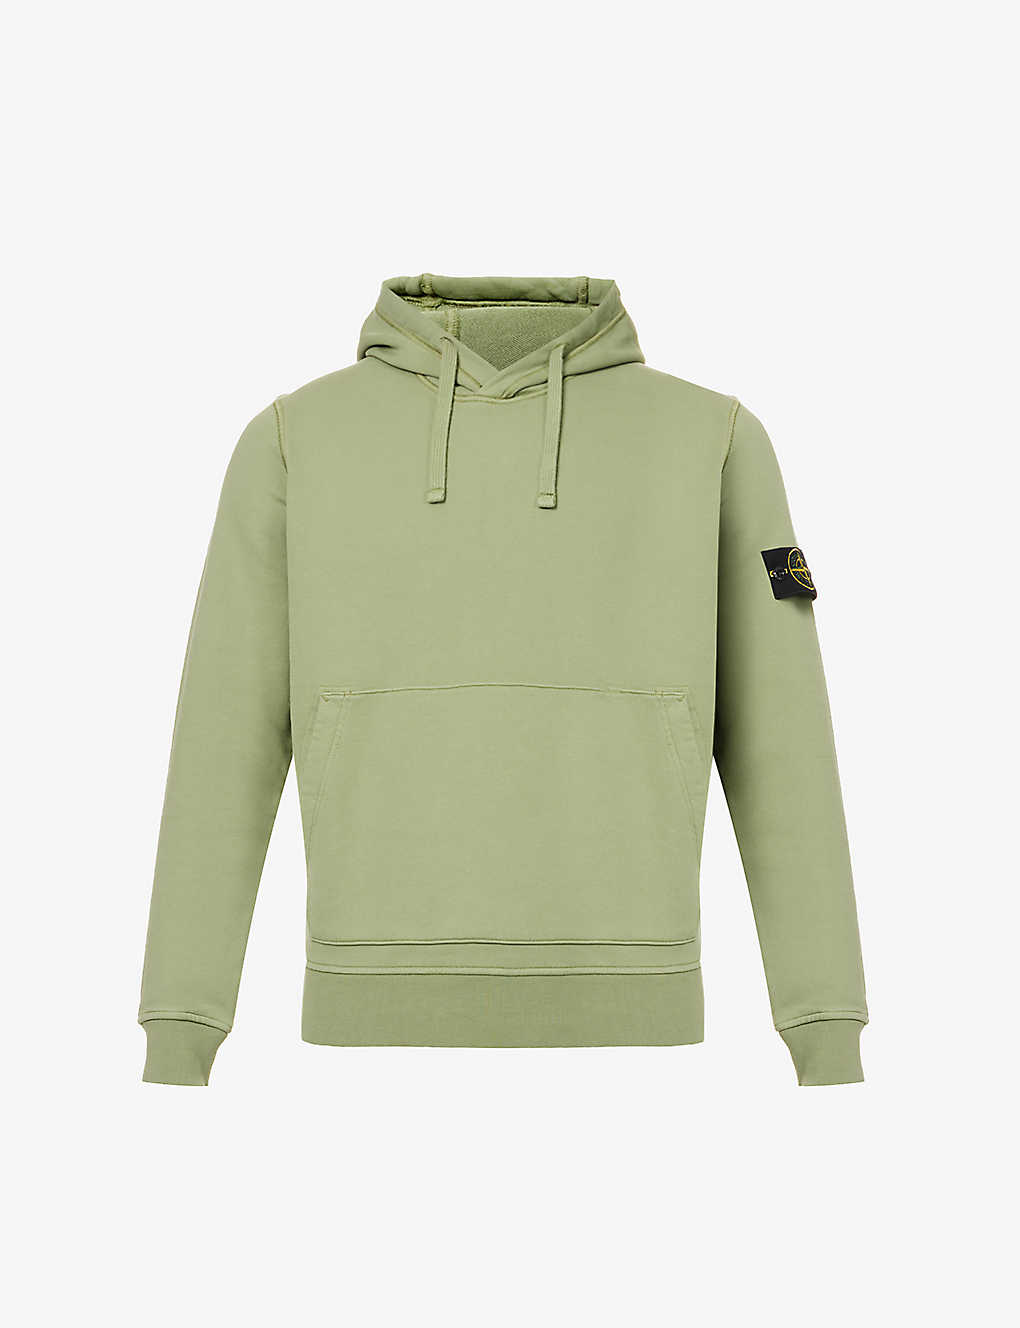 STONE ISLAND - Brand-badge relaxed-fit cotton-jersey hoody | Selfridges.com